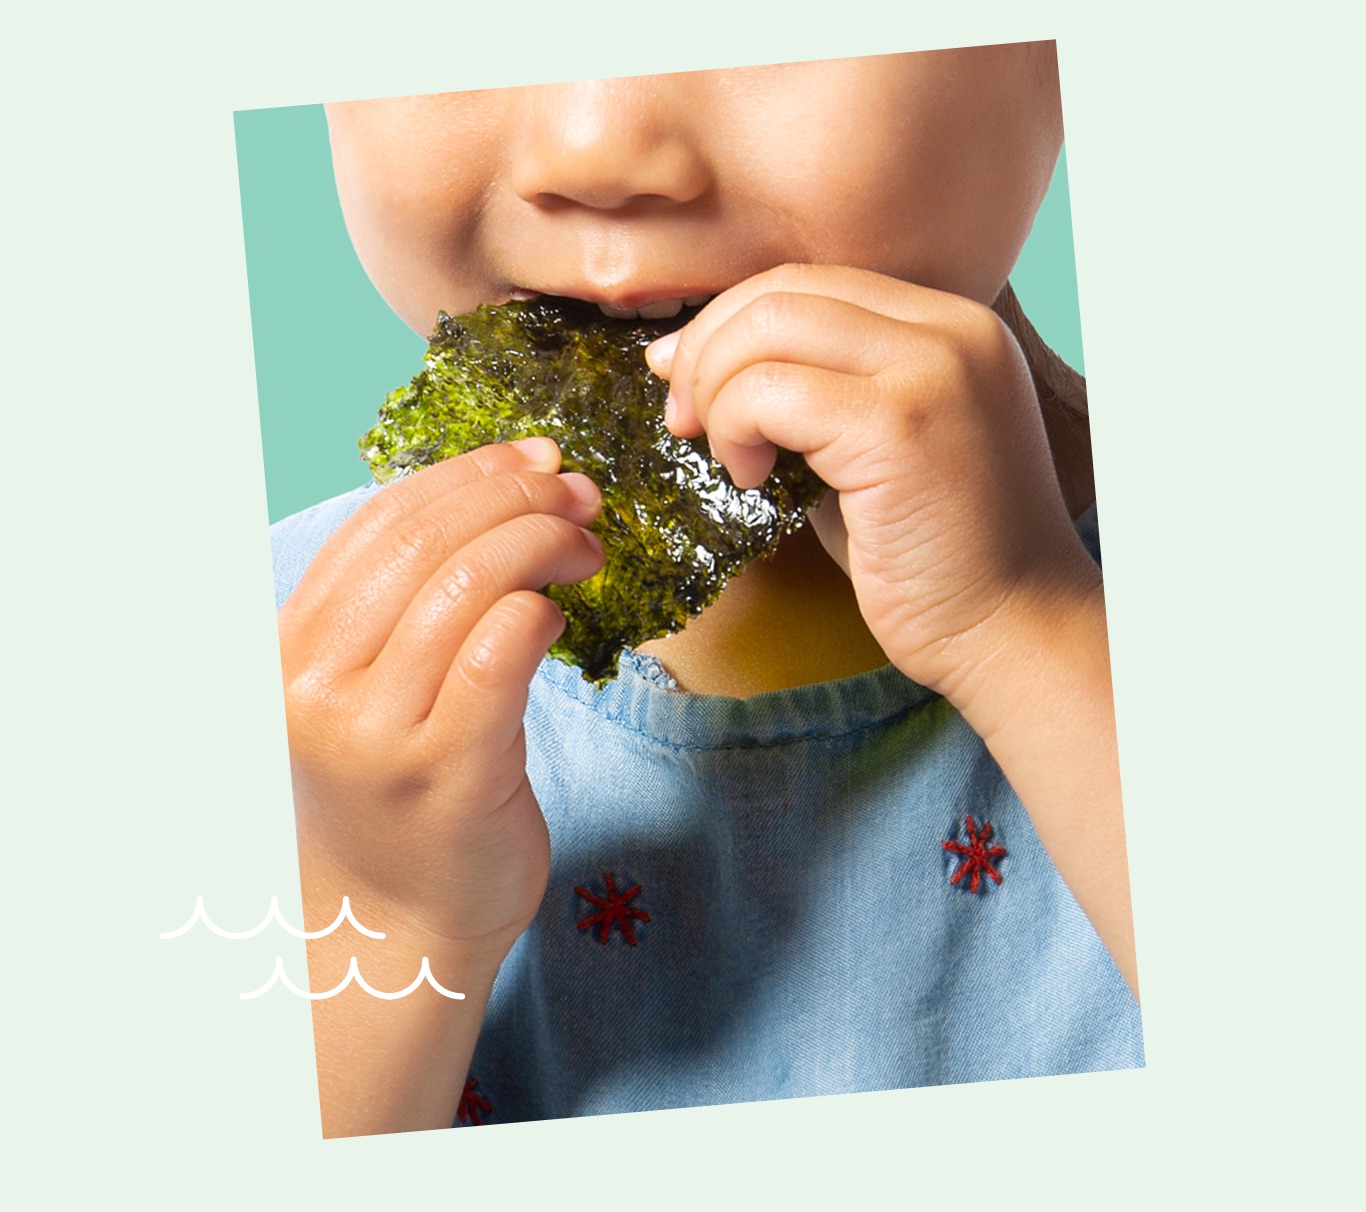 Photo of a young girl enjoying a seaweed snack